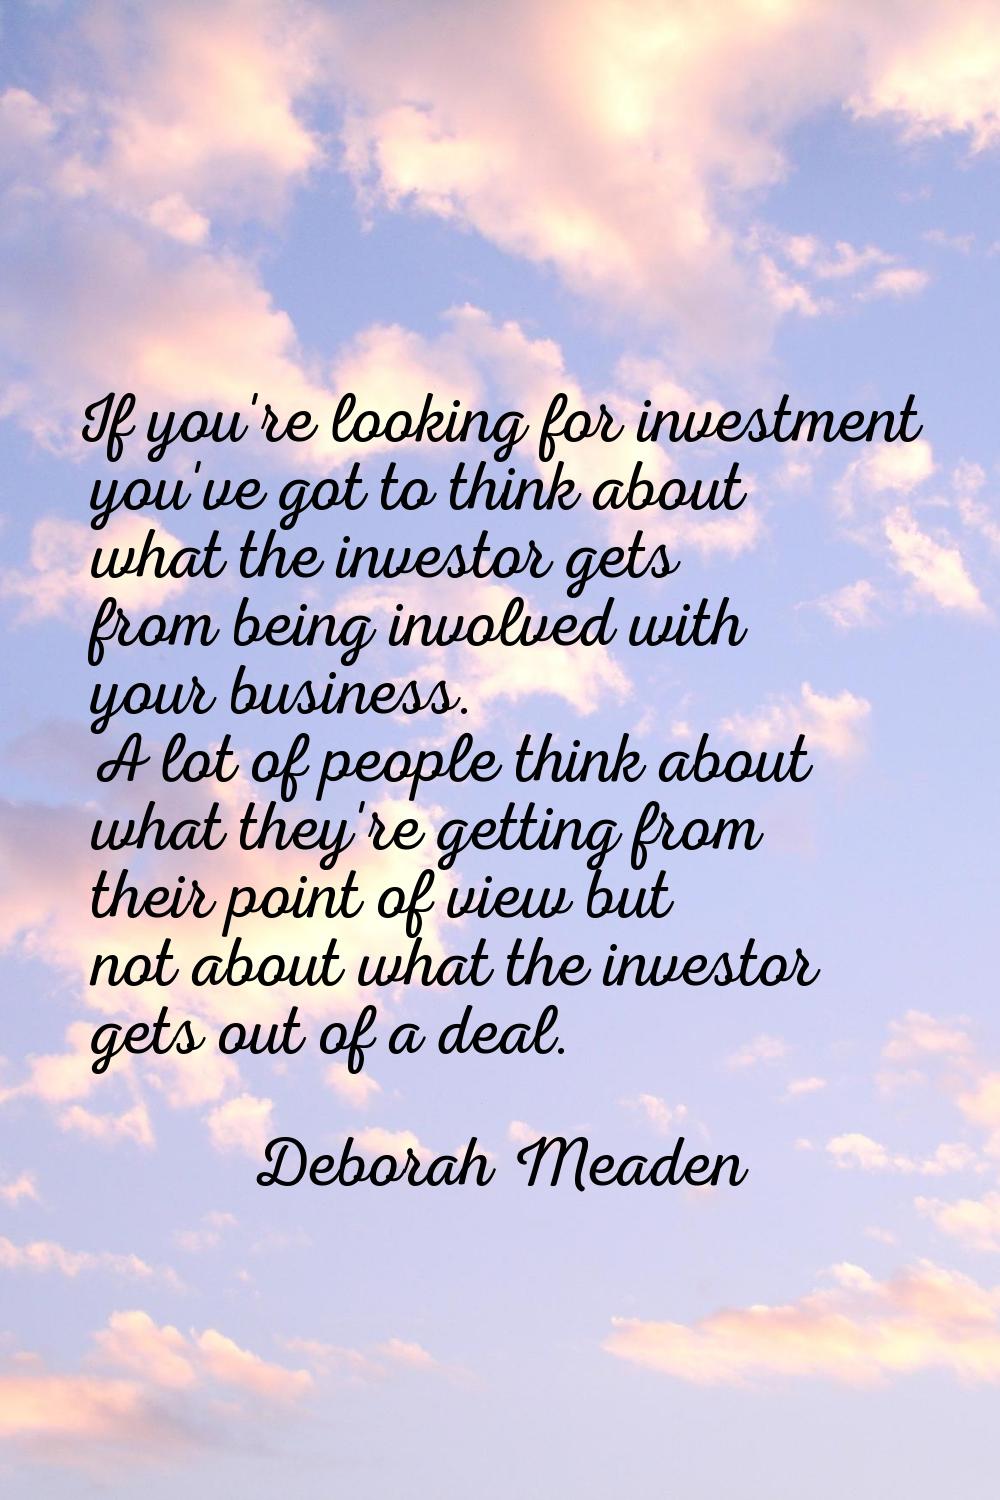 If you're looking for investment you've got to think about what the investor gets from being involv